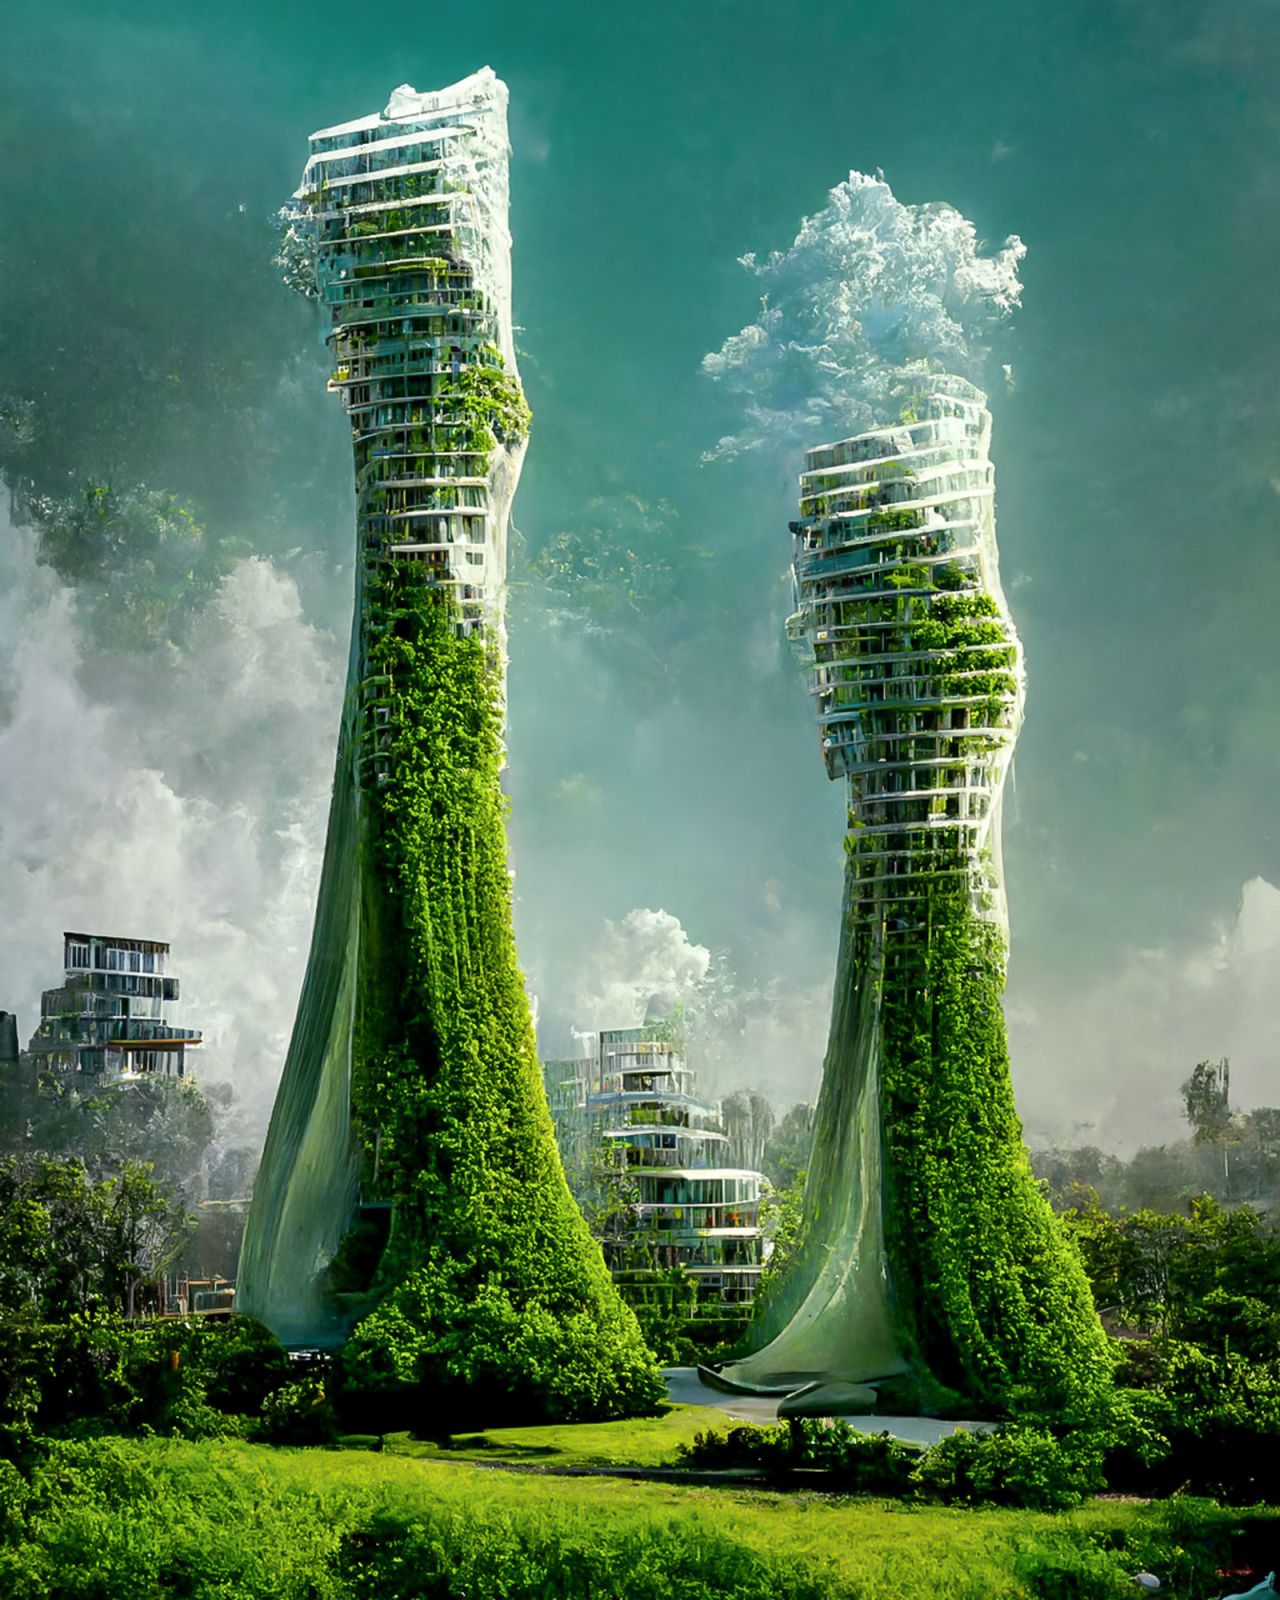 The architect's conceptual towers were created using AI imaging software.